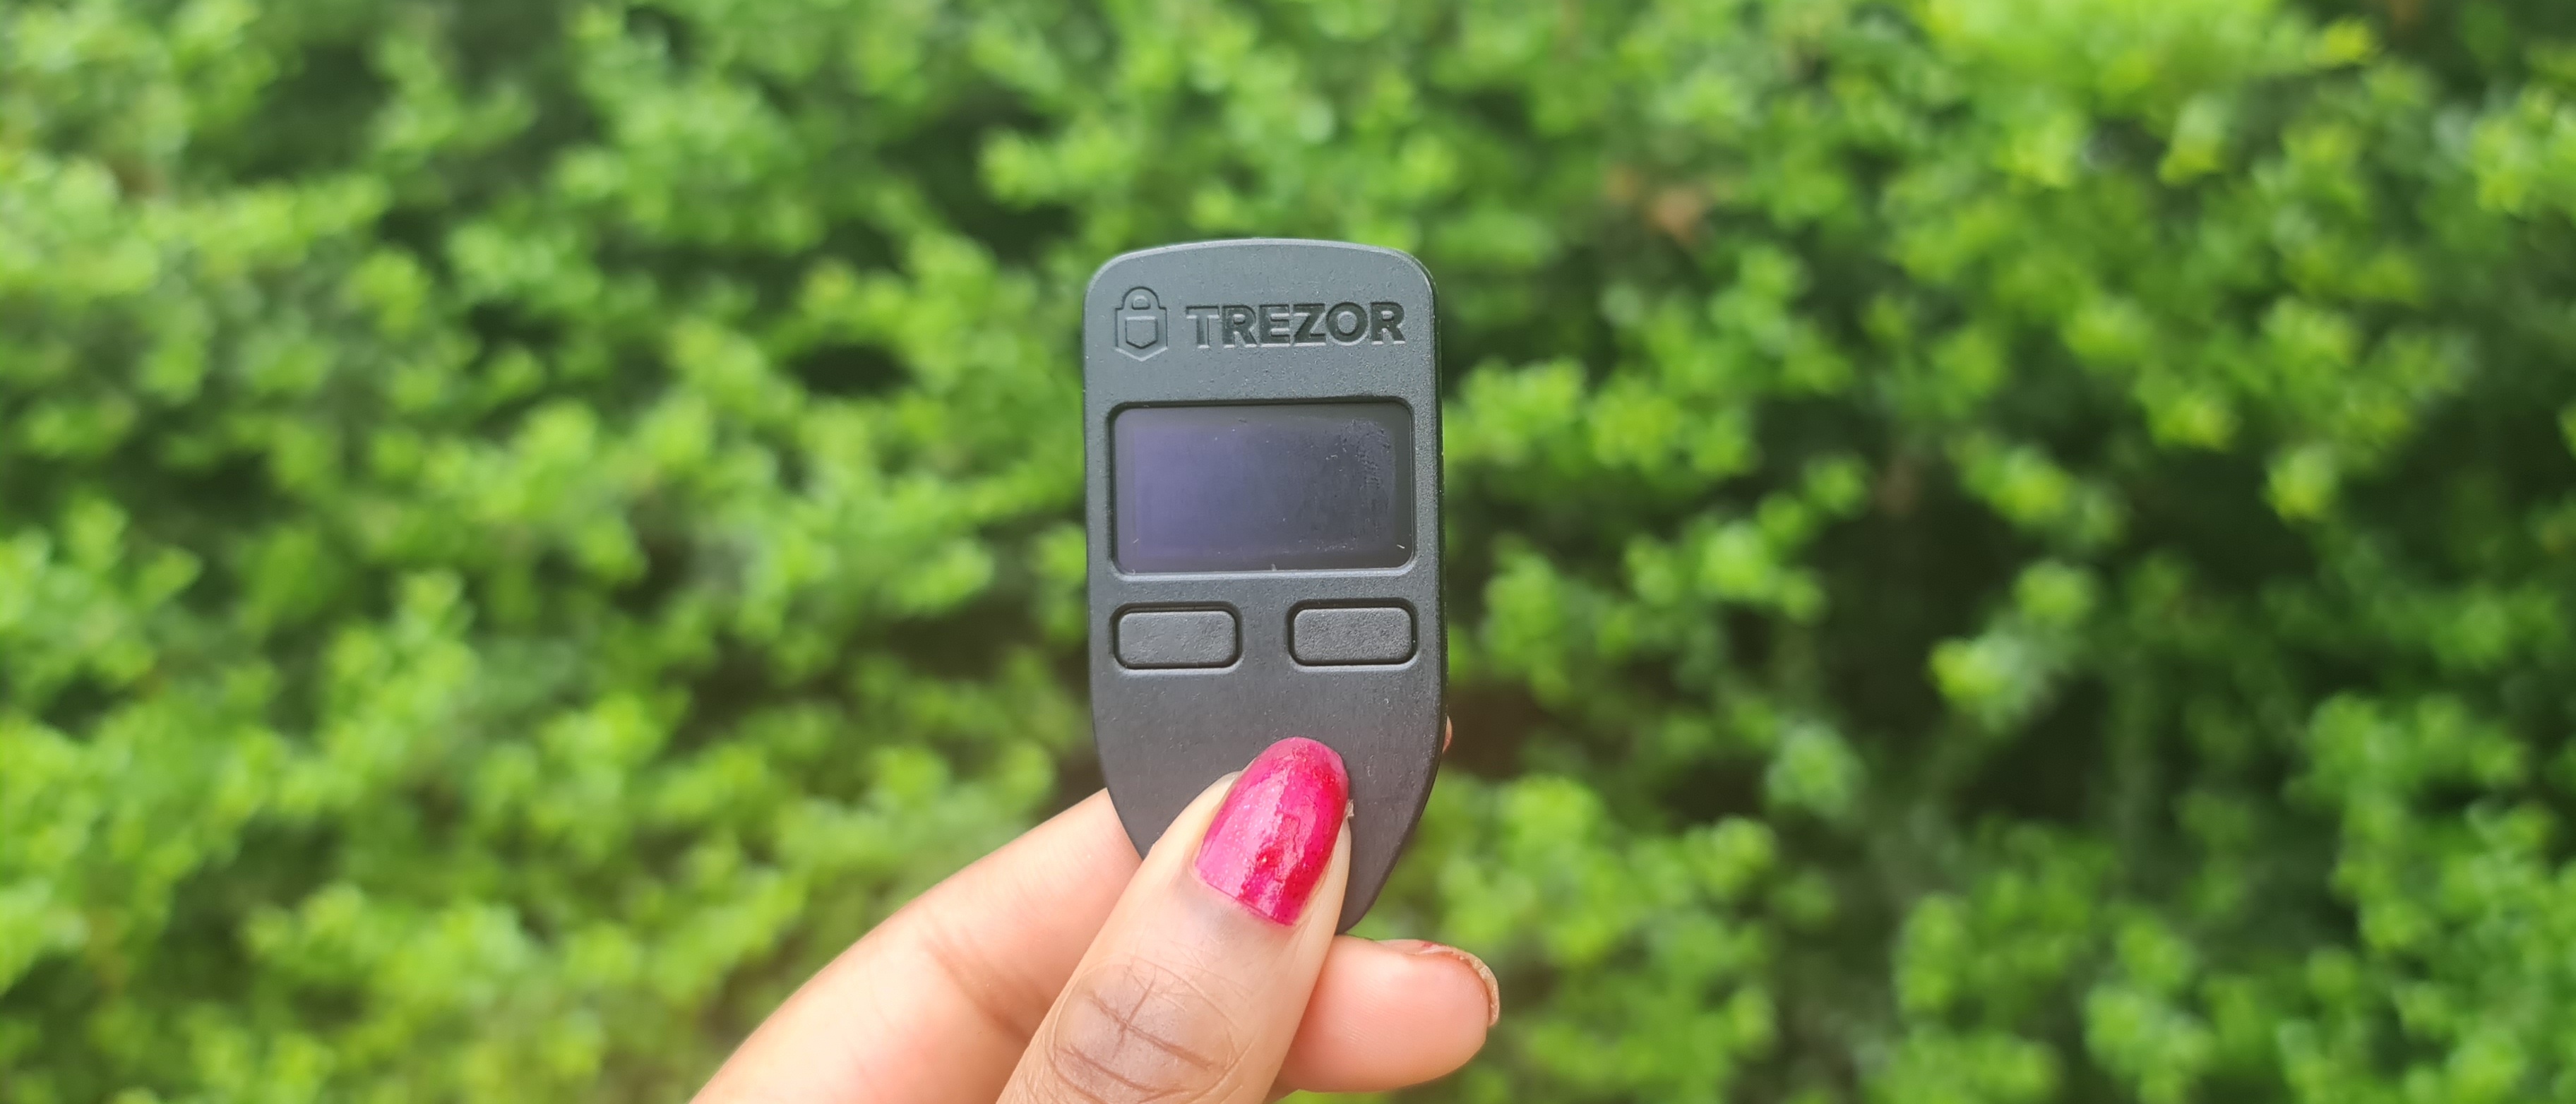 We Tested the New TREZOR Cryptocurrency Wallet: This Is What We